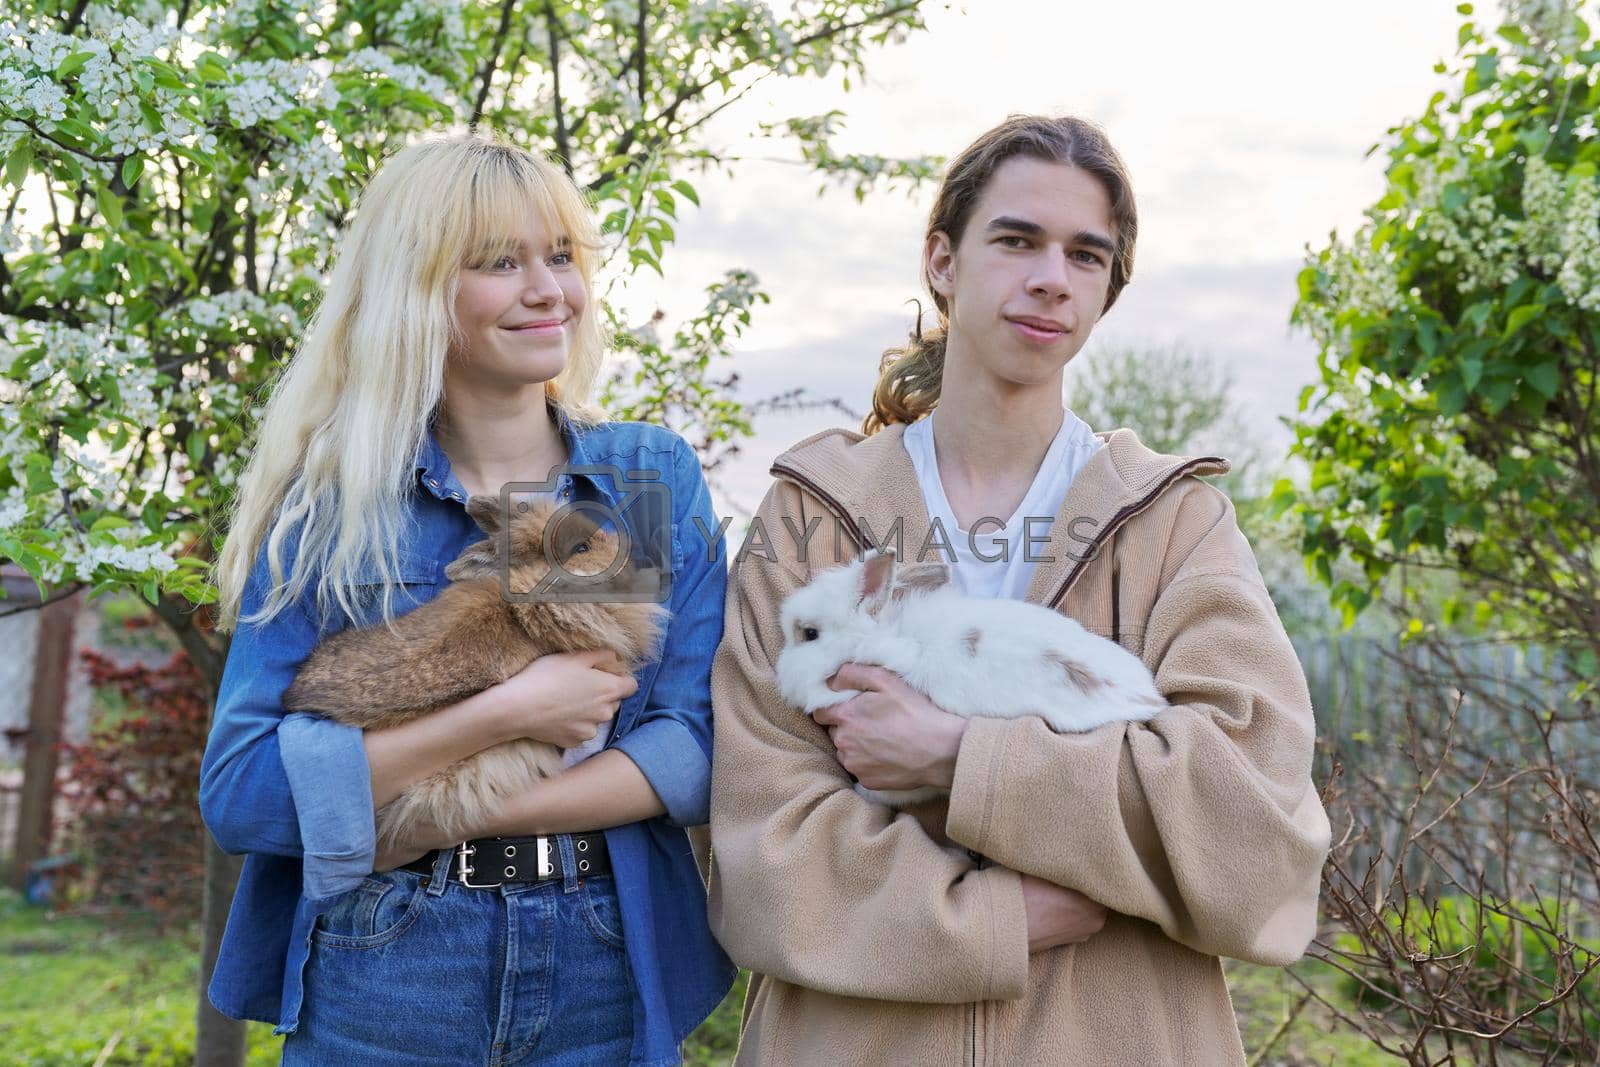 Teenagers with rabbits in their hands, pets a couple of decorative rabbits, nature, spring green blooming garden background